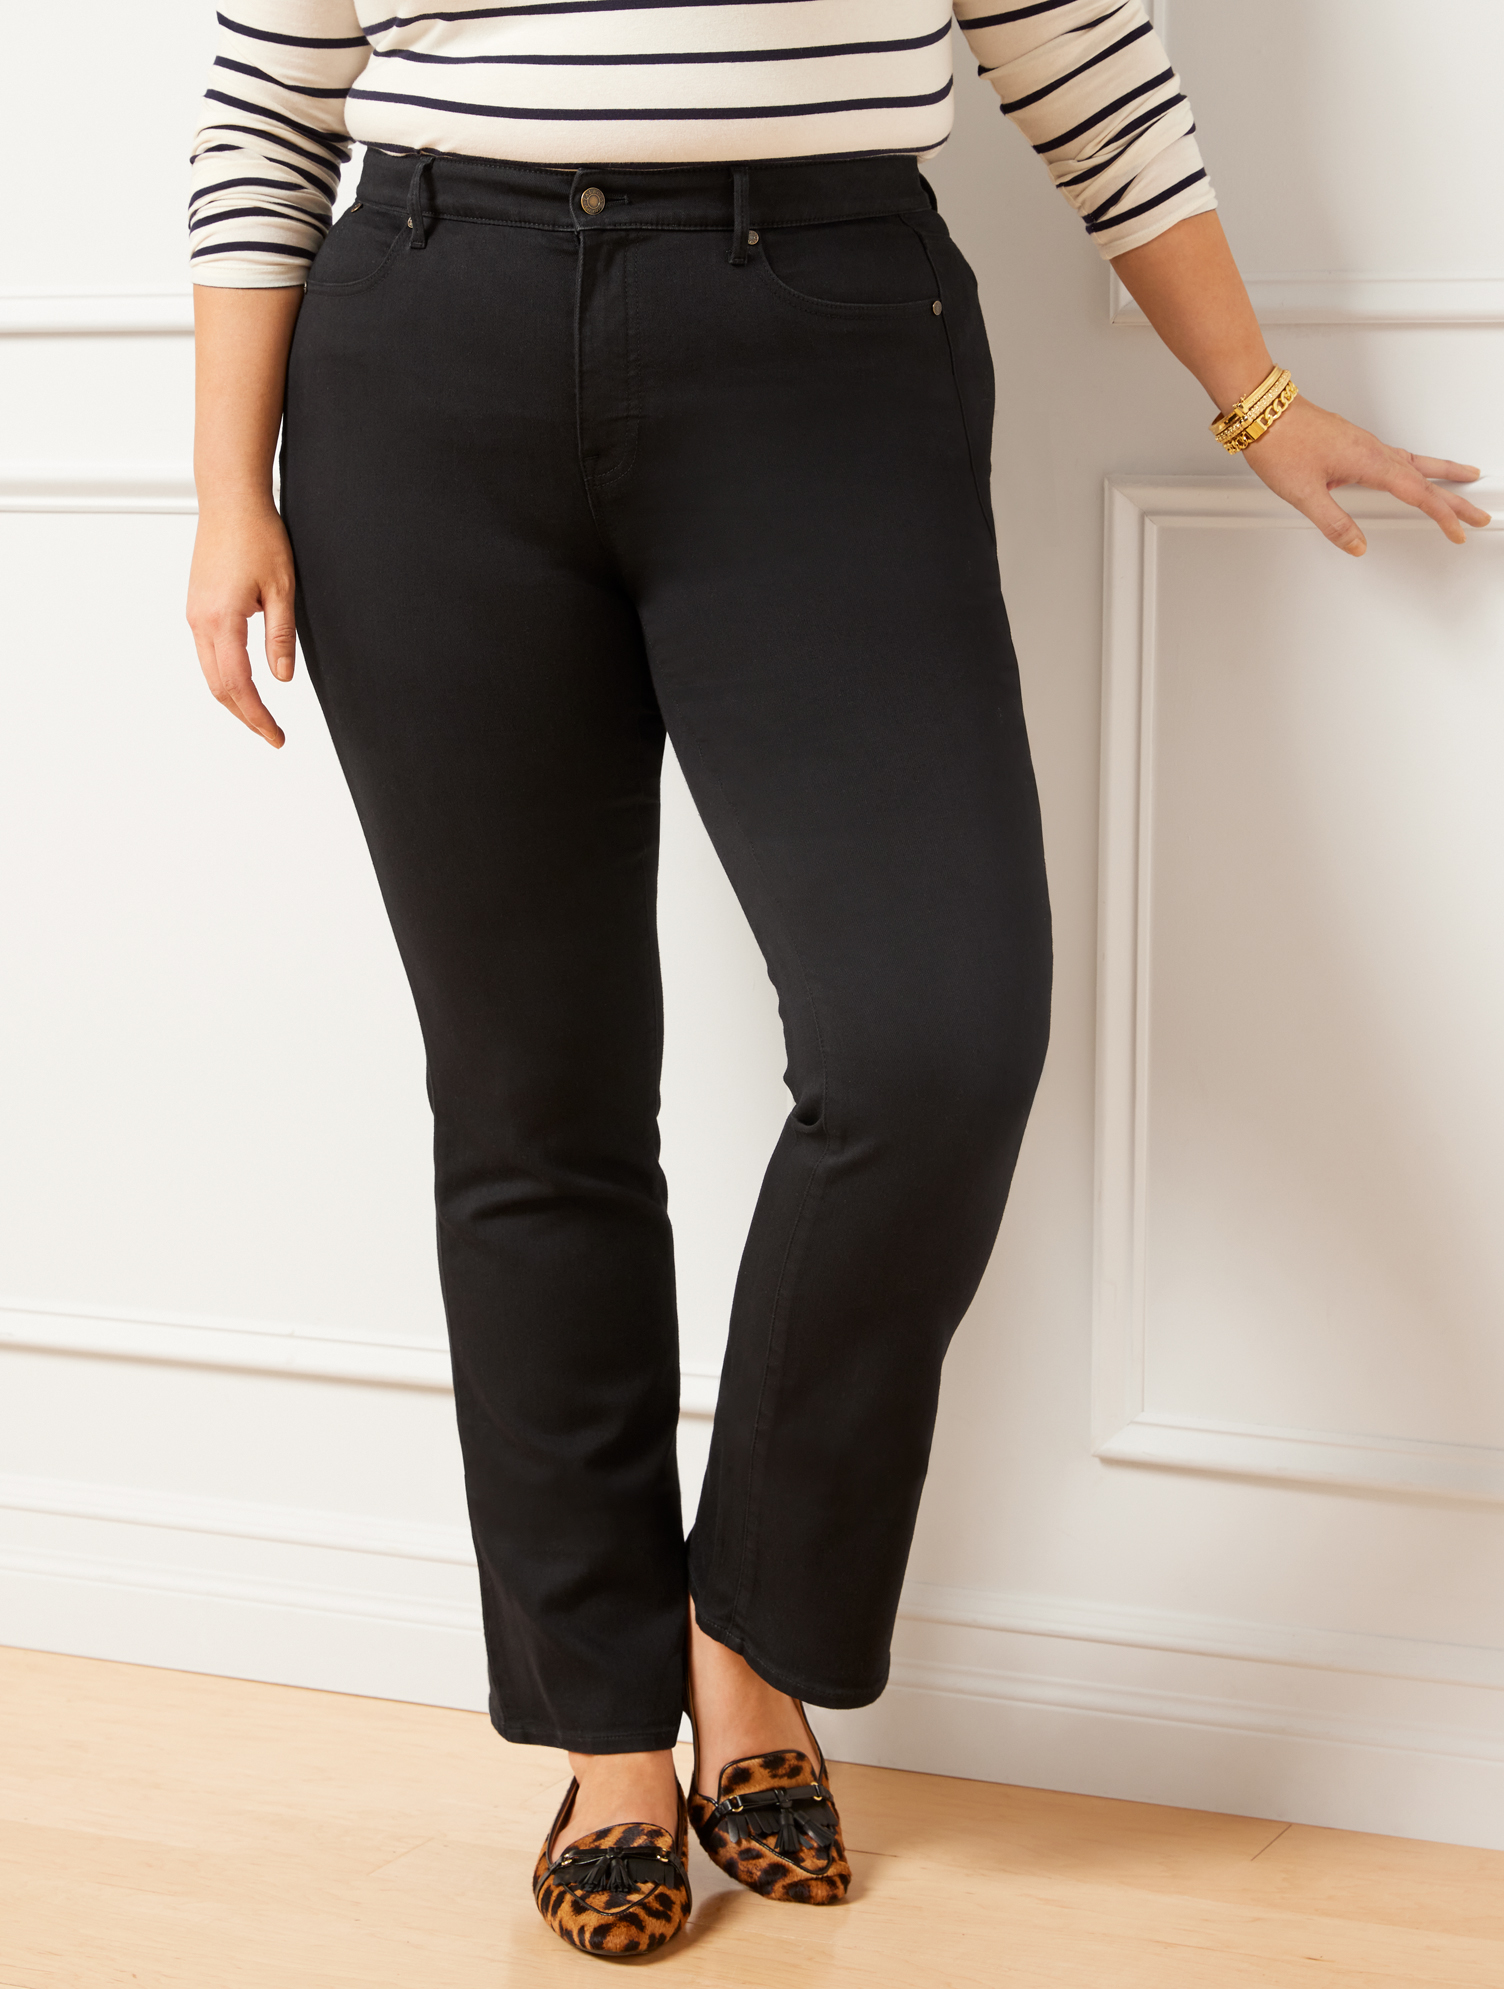 Talbots Plus Size - High-waist Barely Boot Jeans - Black - 22